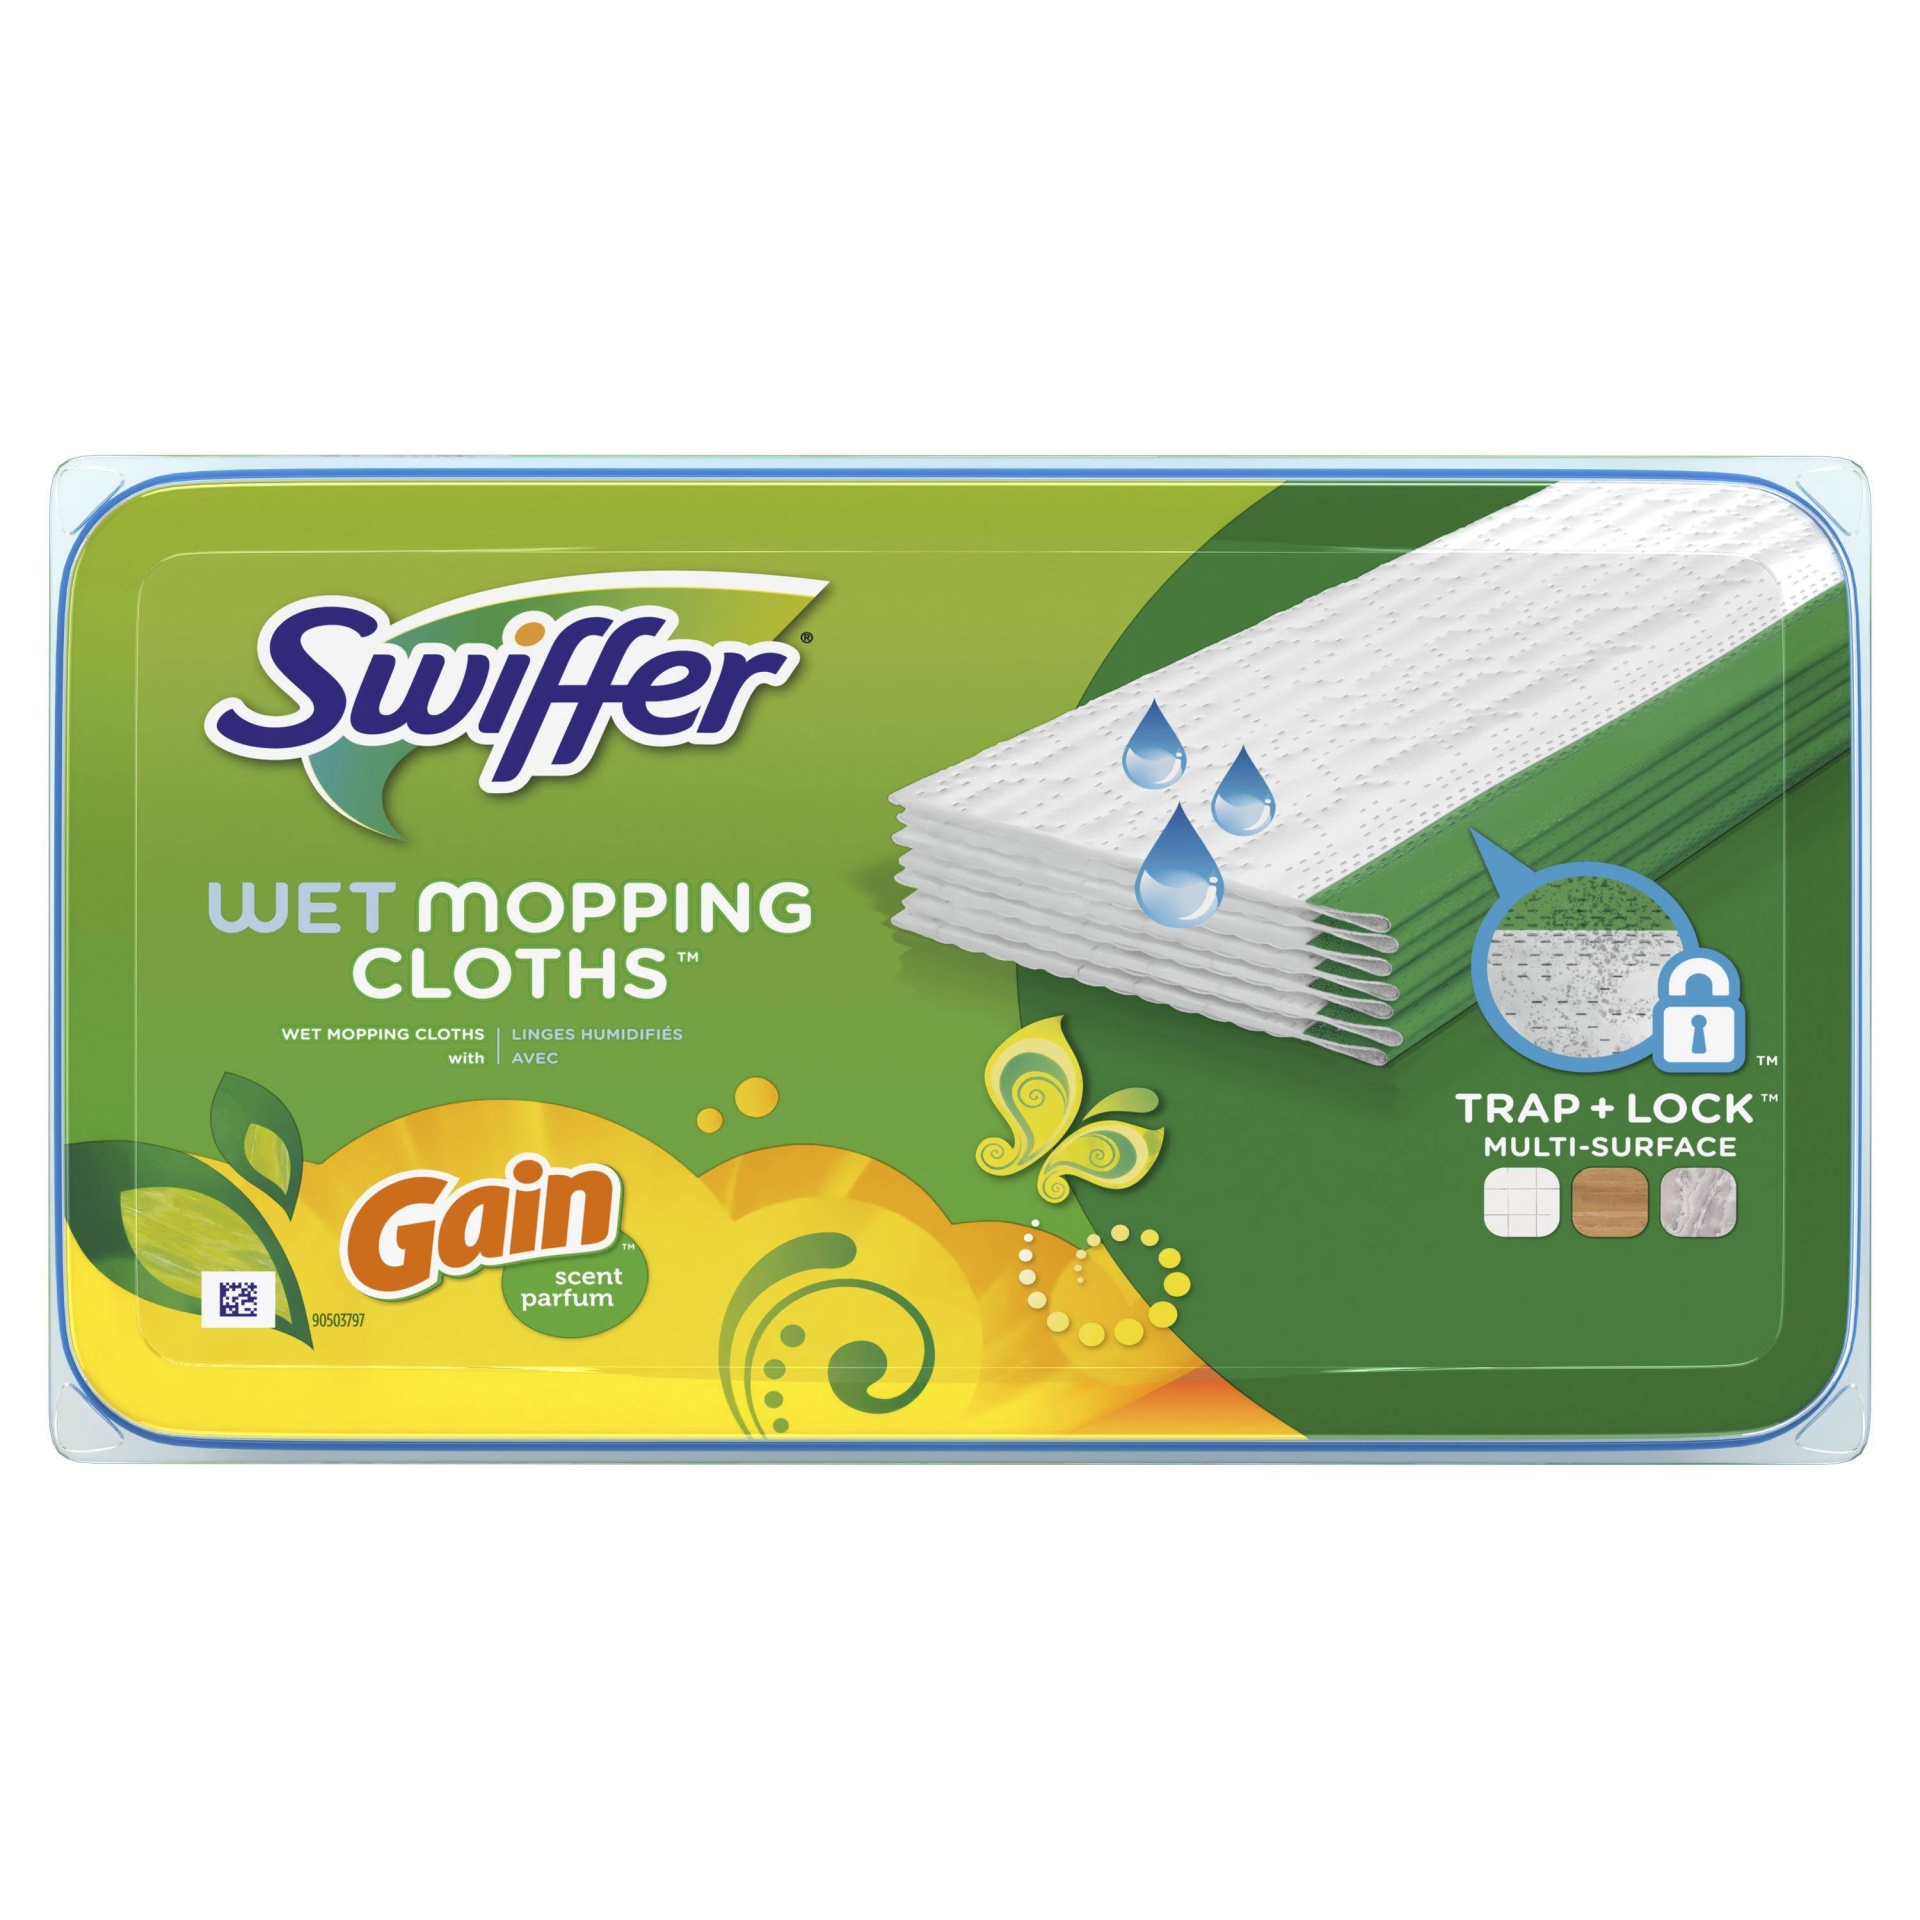 slide 1 of 9, Swiffer Sweeper Wet Mopping Cloths with Gain Scent - 24ct, 24 ct